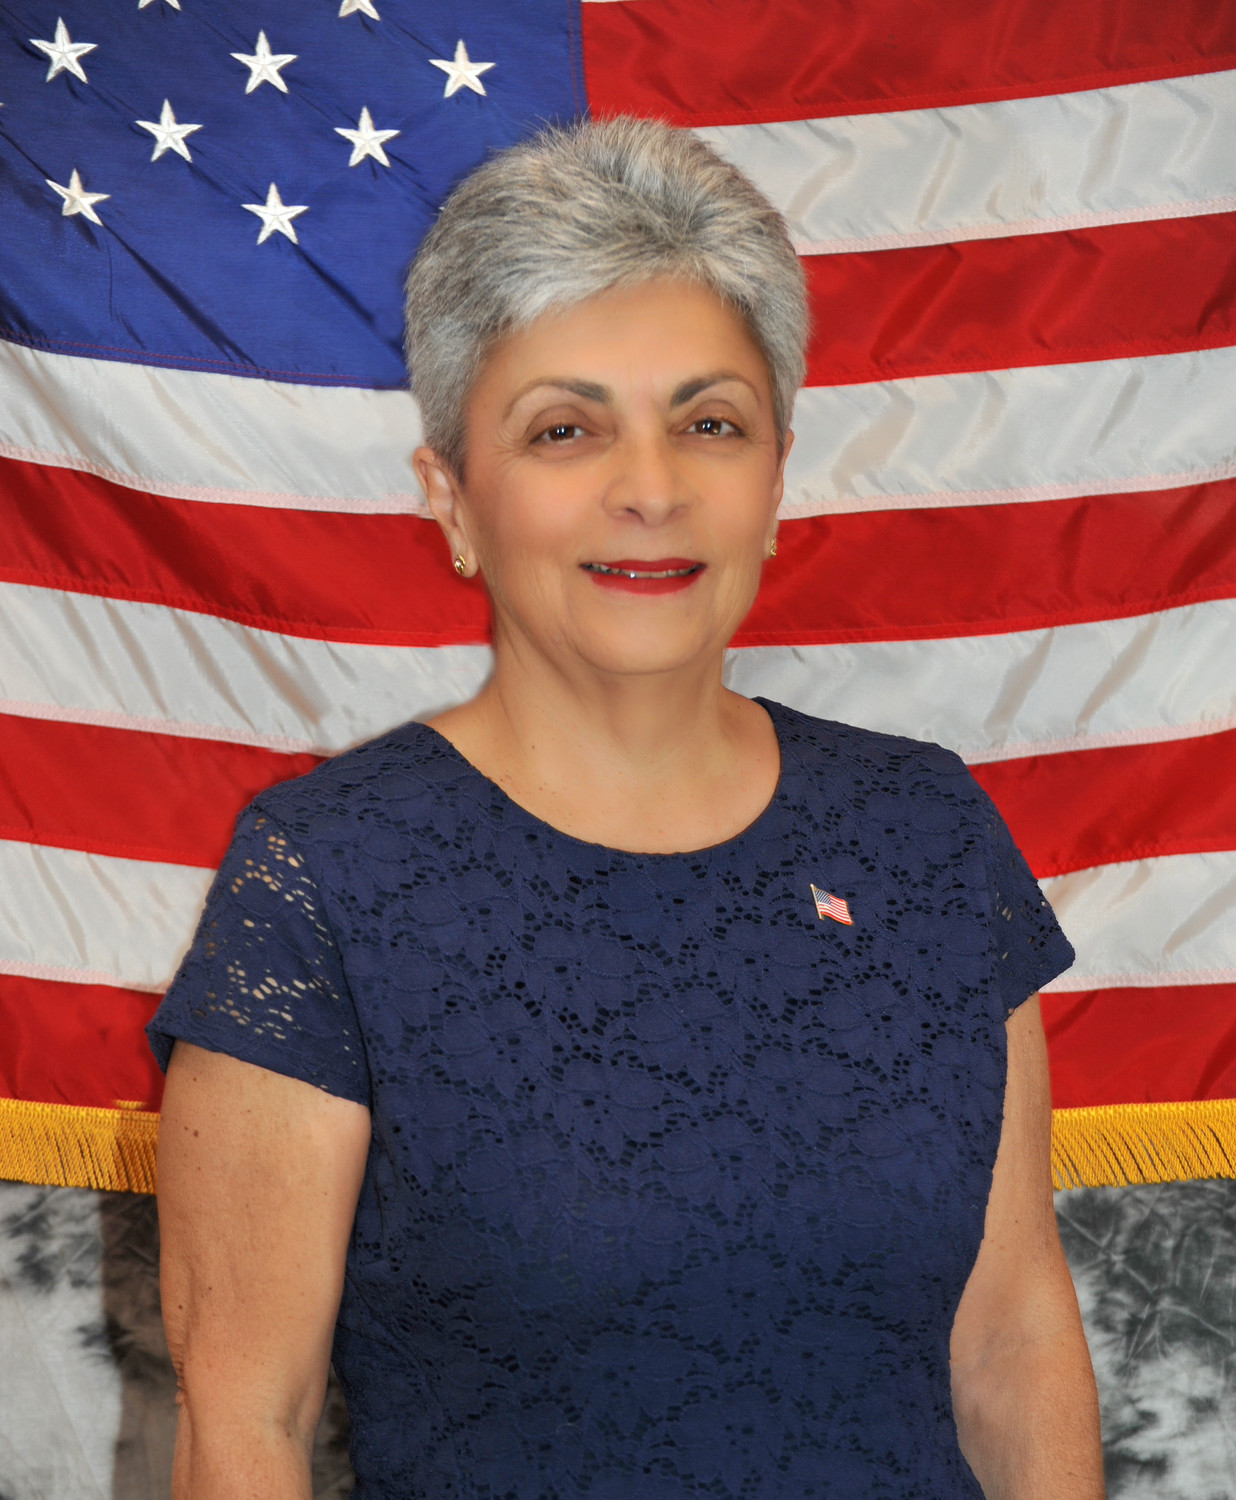 Zefy Christopoulos
Challenger 

Age: 62
Party Affiliations: Republican, Independence Party member
Profession: Former Nassau County Legislature Press Secretary and former Glen Cove Mayor Chief of Staff
Years in Glen Cove: 35
Family: Widow, two children